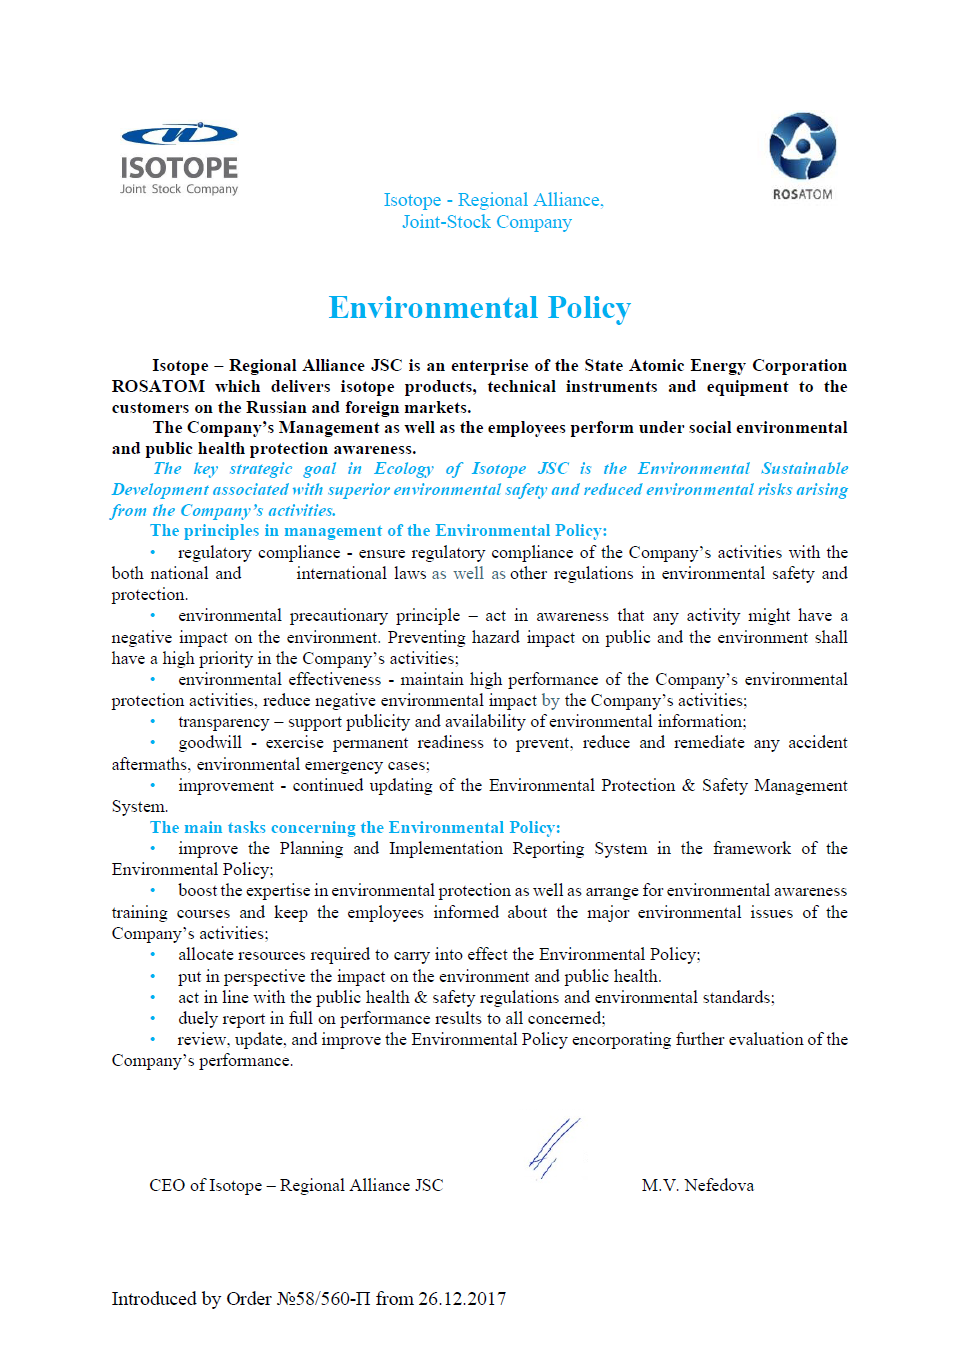 jscisotope_environmentalpolicy.png